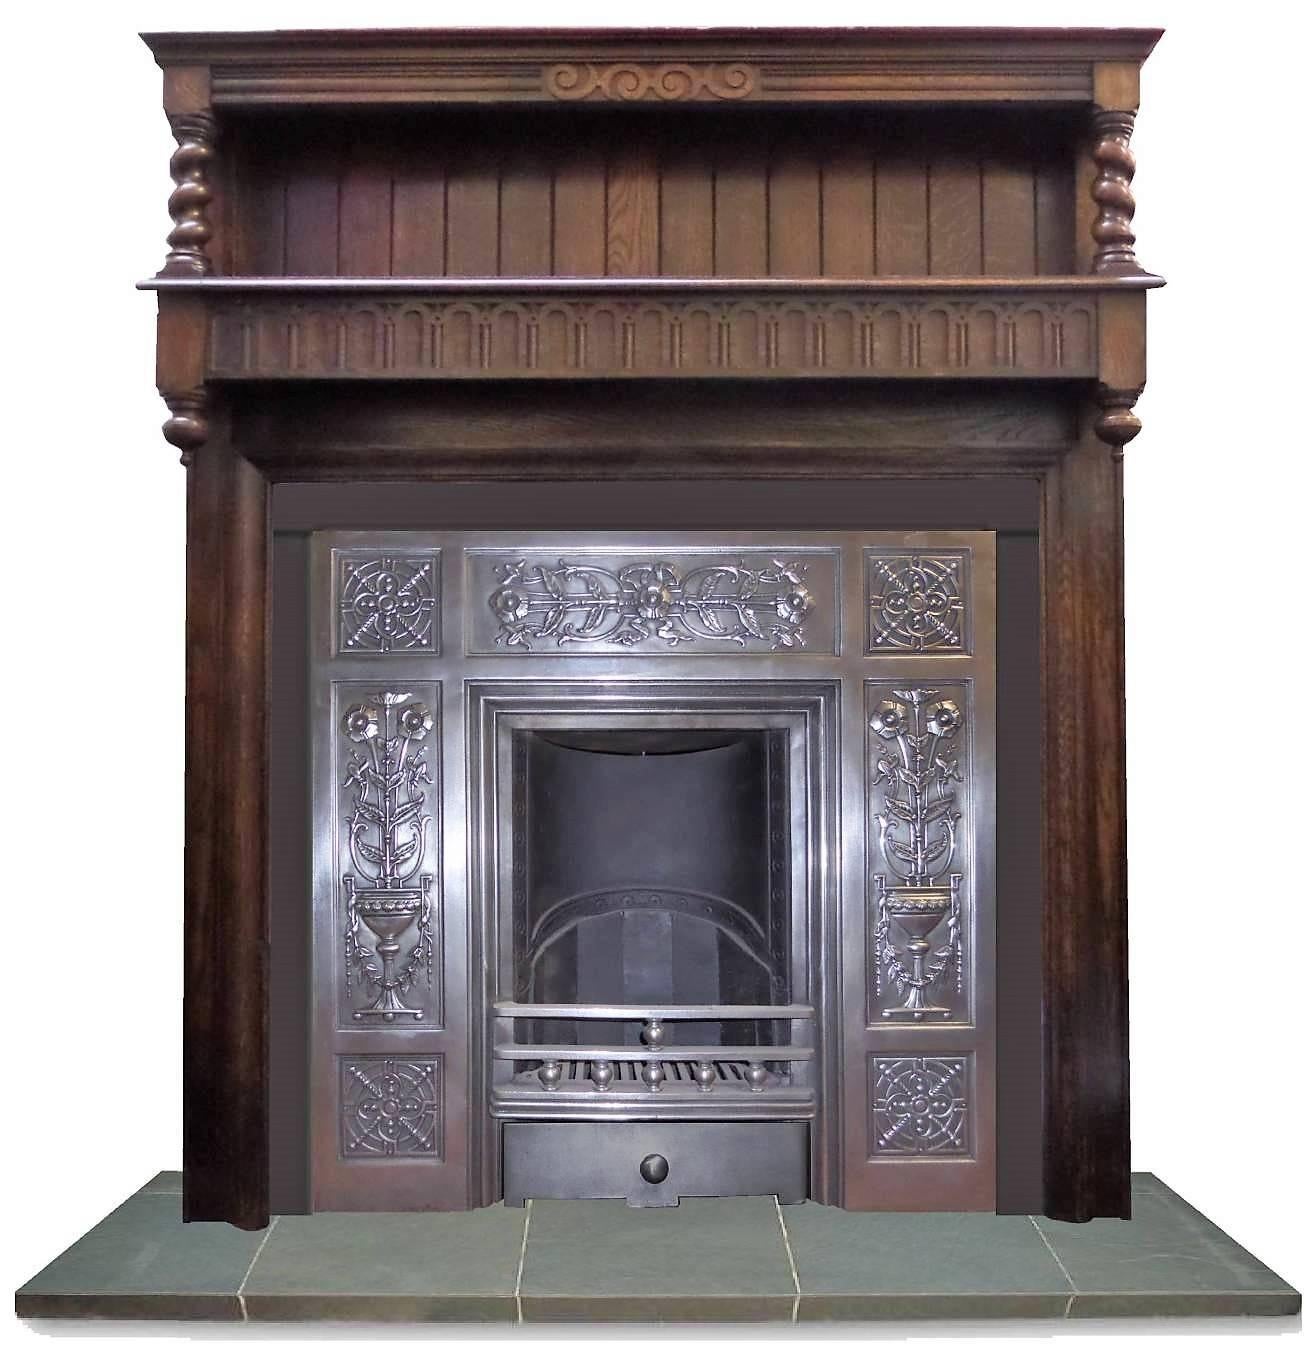 Antique restored 20th century oak Arts & Craft style wood surround, dark oak grain with impressive spindle and Arts & Craft paneling and carving. Can be adjusted to suit most insert, date circa 1915.